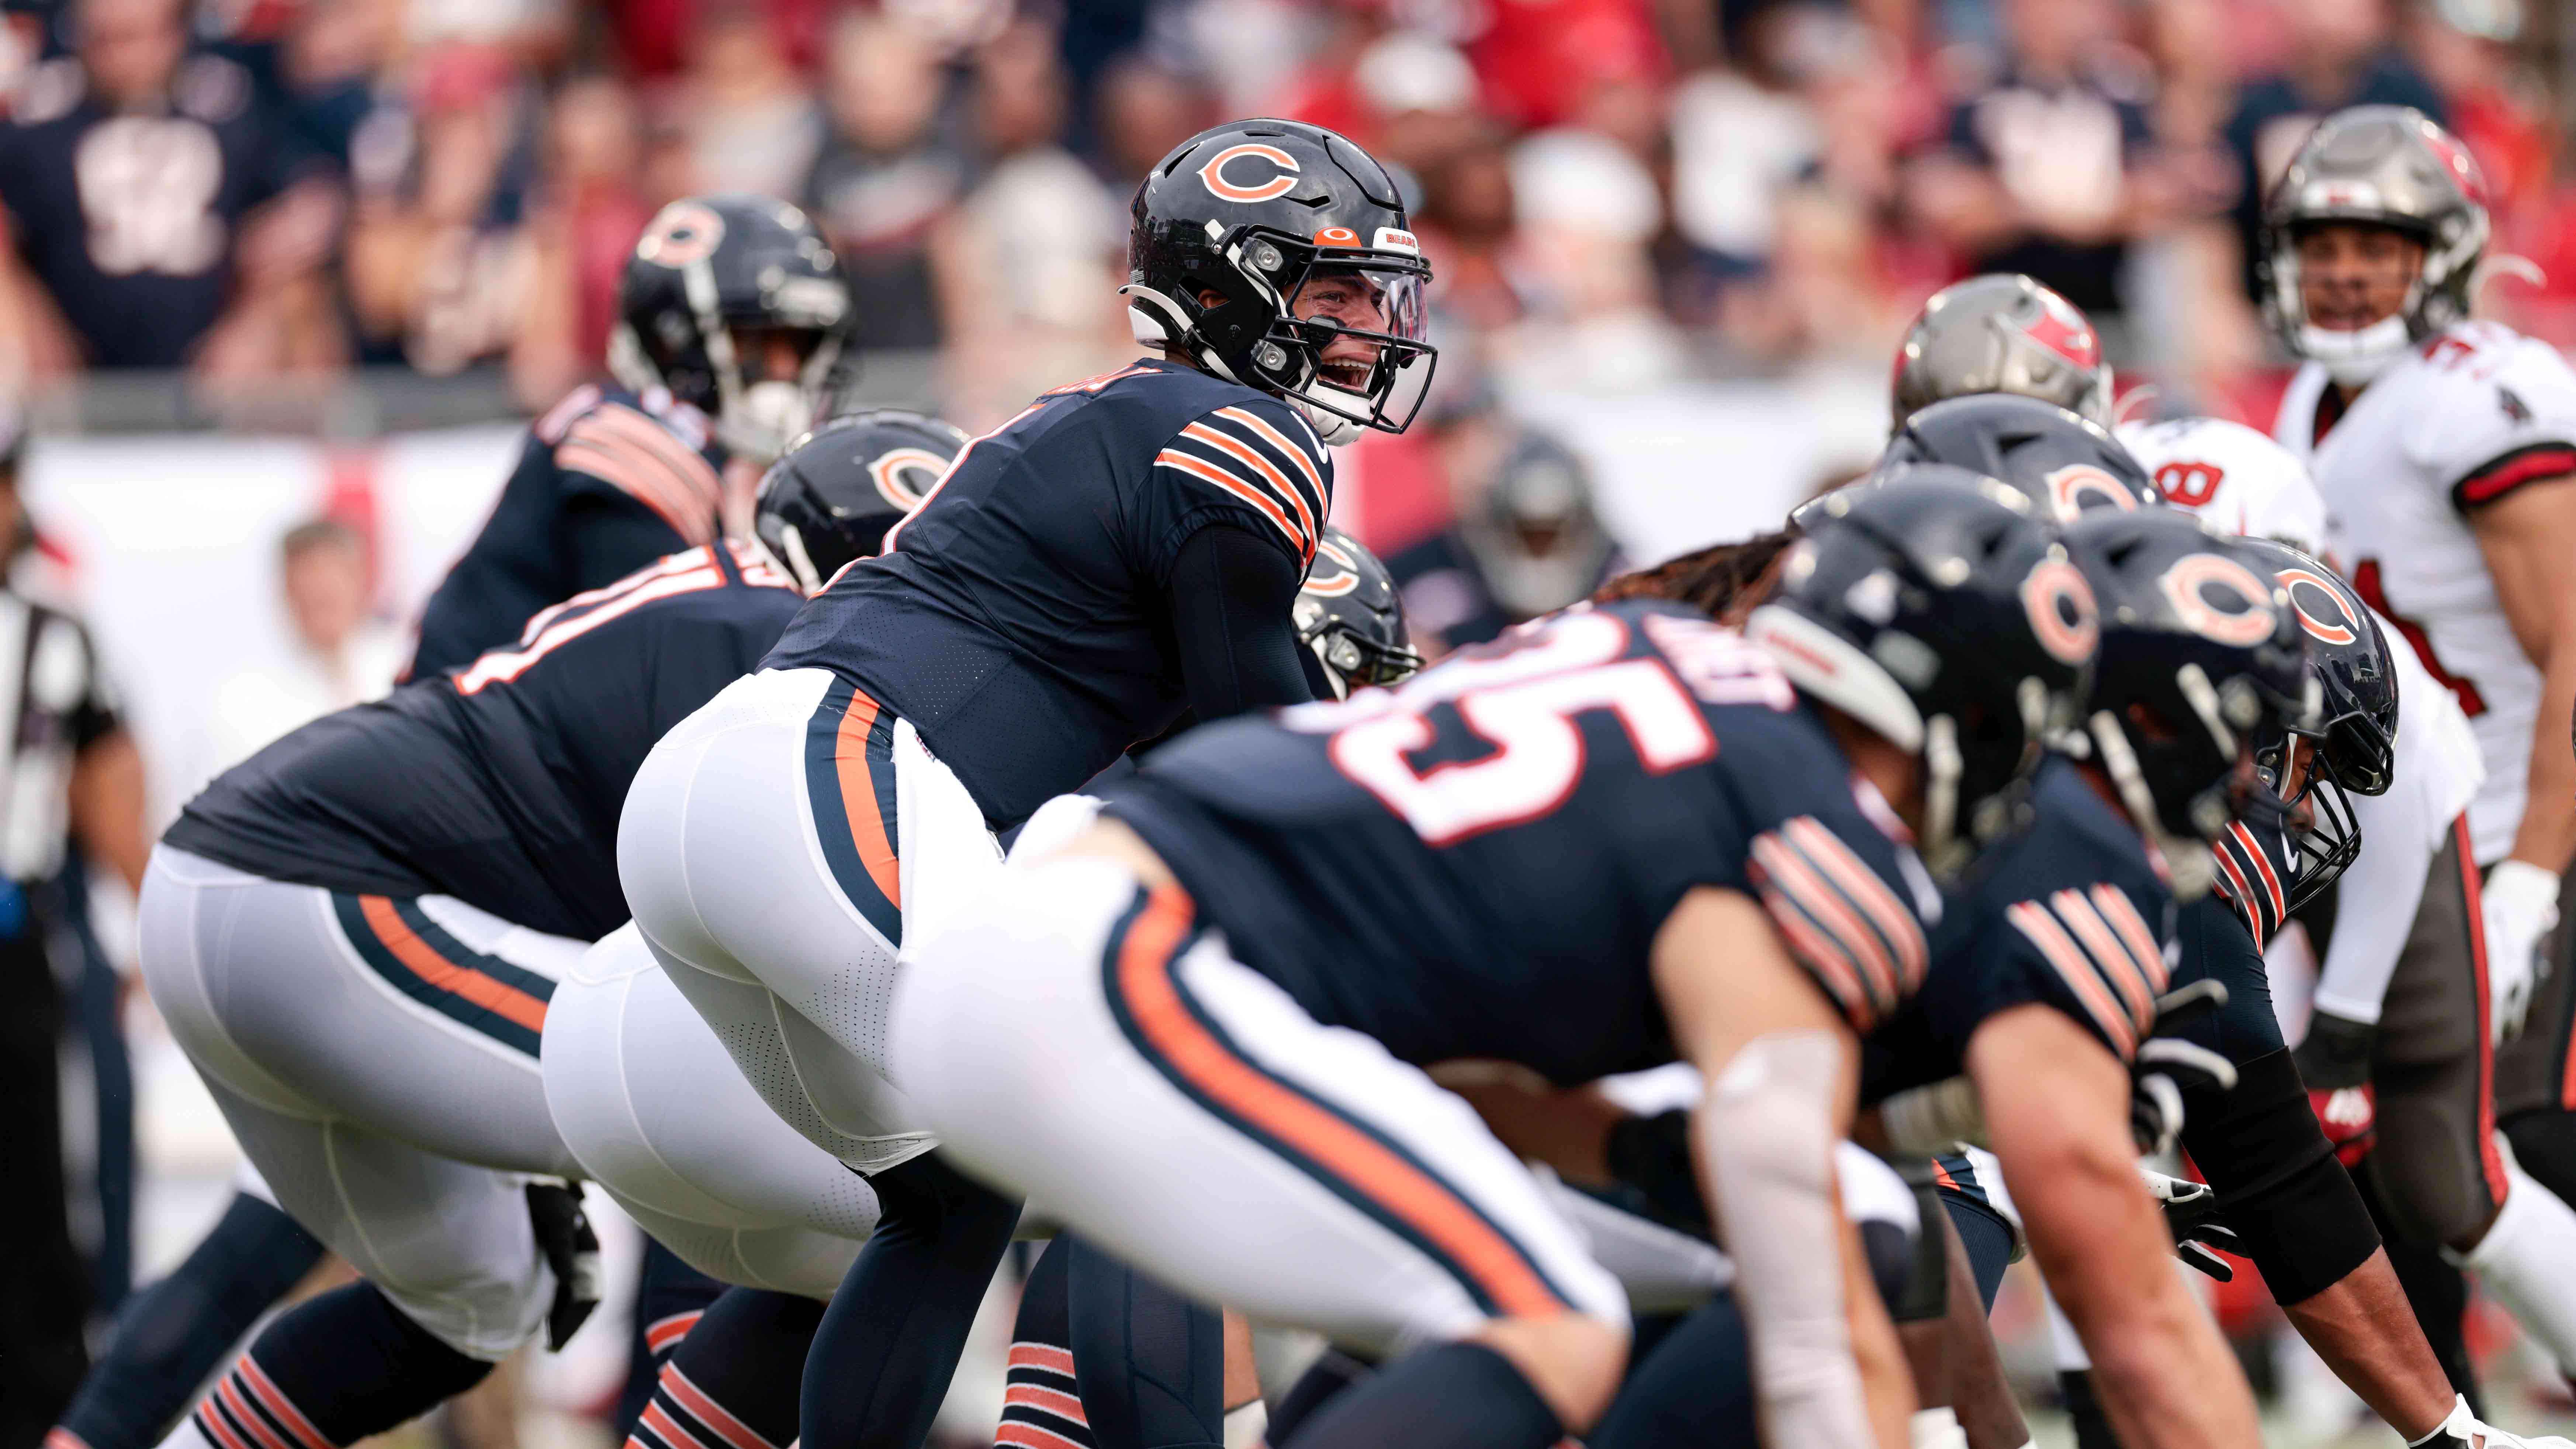 Bears vs. Bucs live stream: How to watch NFL Week 2 game on TV, online –  NBC Sports Chicago